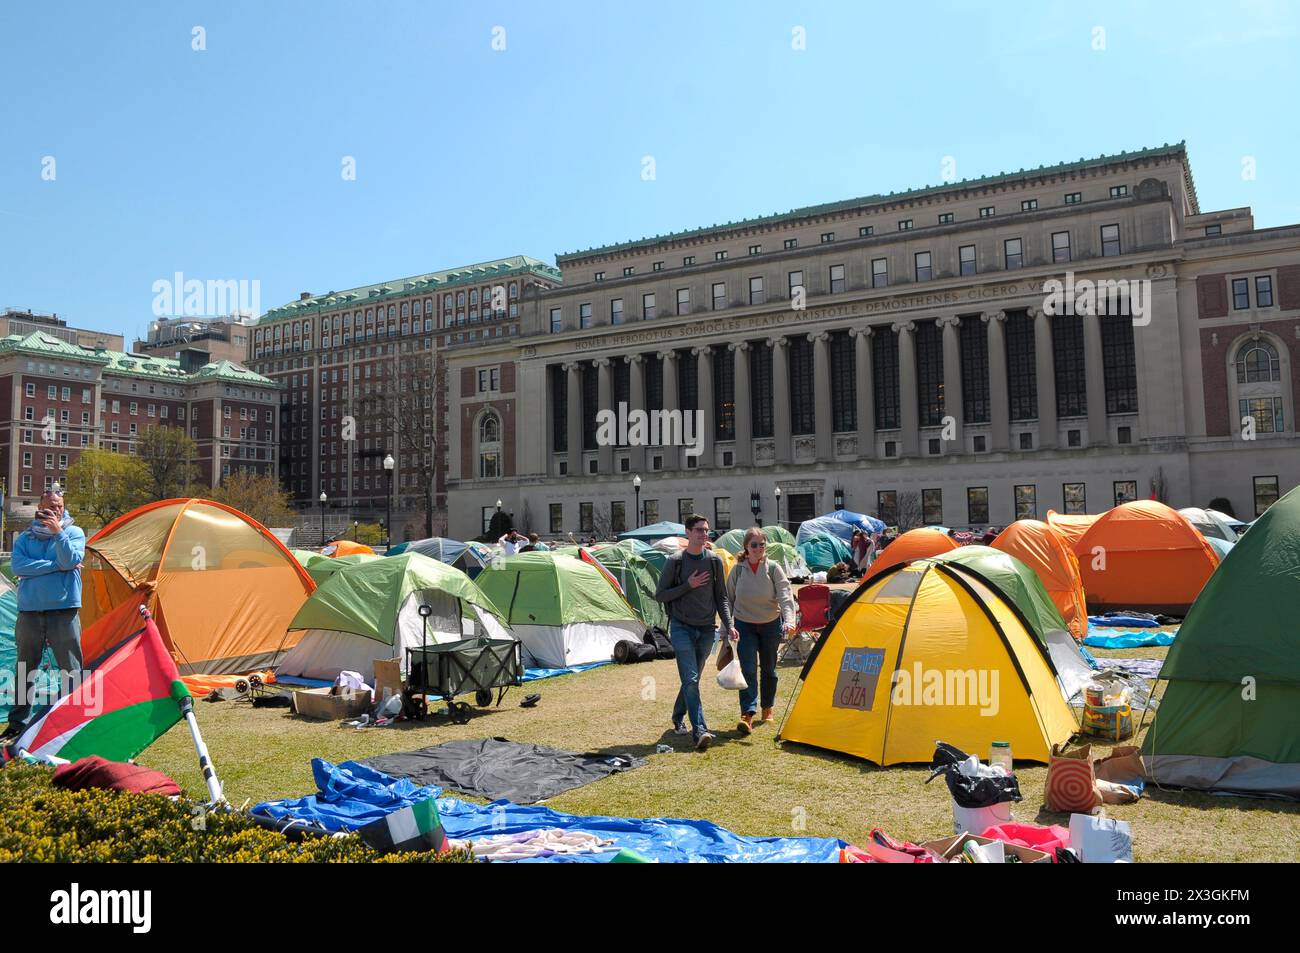 Tents are seen at a pro-Palestine encampment at Columbia University. Pro-Palestine demonstrators rallied on the lawn in Columbia University in Manhattan, New York City condemning the Israel Defense Forces' military operations in Gaza. Since last week, students and pro-Palestine activists at Columbia University have held a sit-in protest on campus, forming a 'Gaza Solidarity Encampment.' Encampments have been forming in other universities in New York City, as well as in campuses nationwide in support of Palestine. Negotiations are underway between student protestors at Columbia University and t Stock Photo